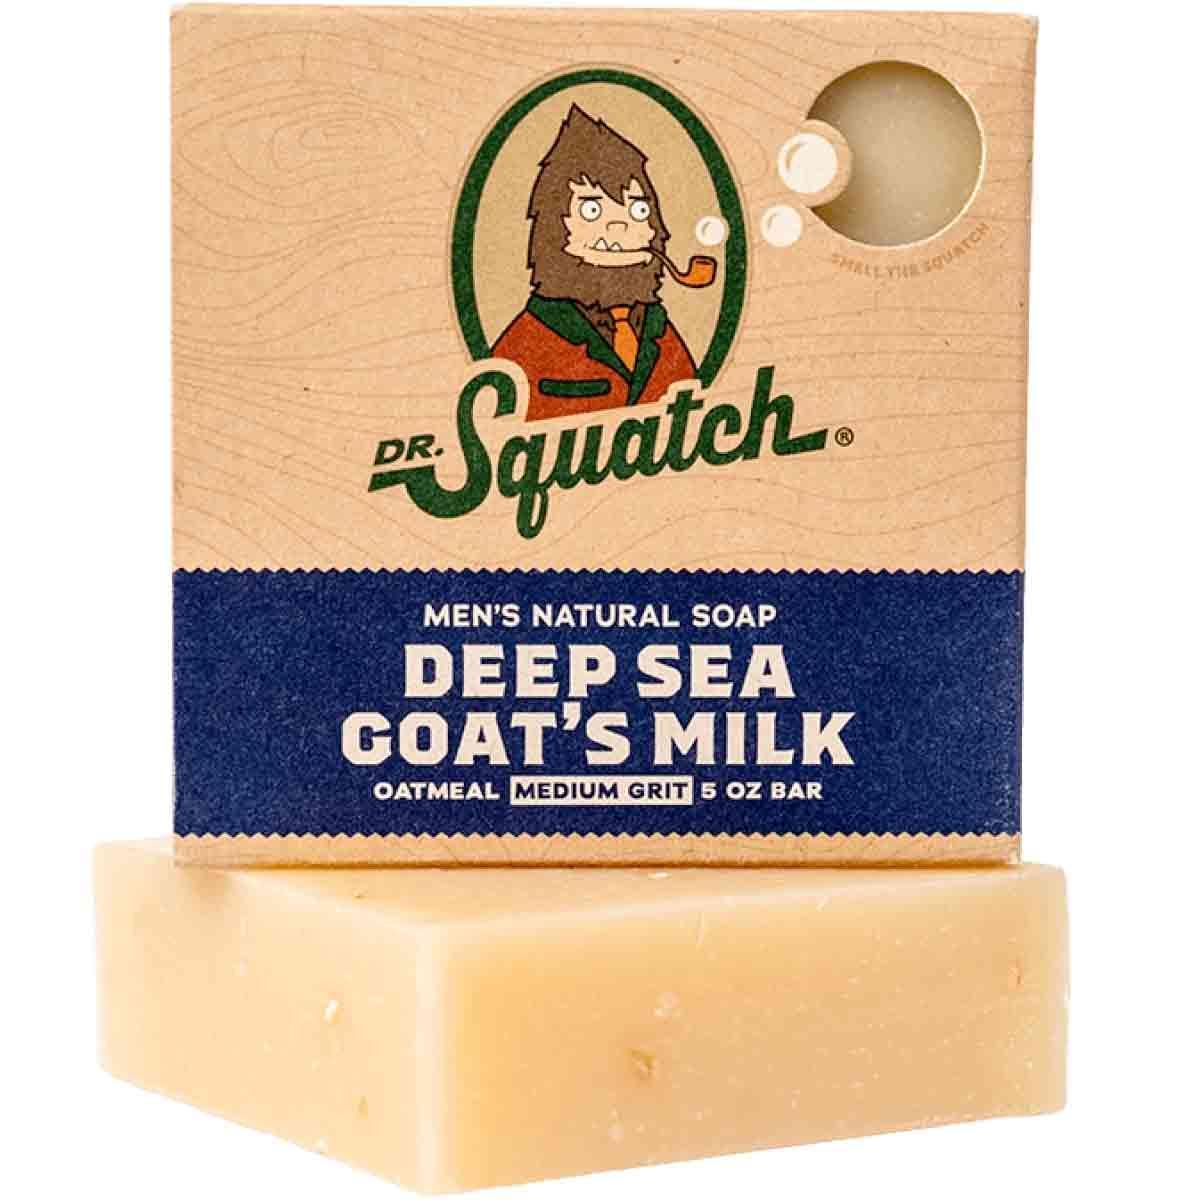 Dr. Squatch Limited Edition All Natural Bar Soap for Men with Medium Grit, Spidey Suds